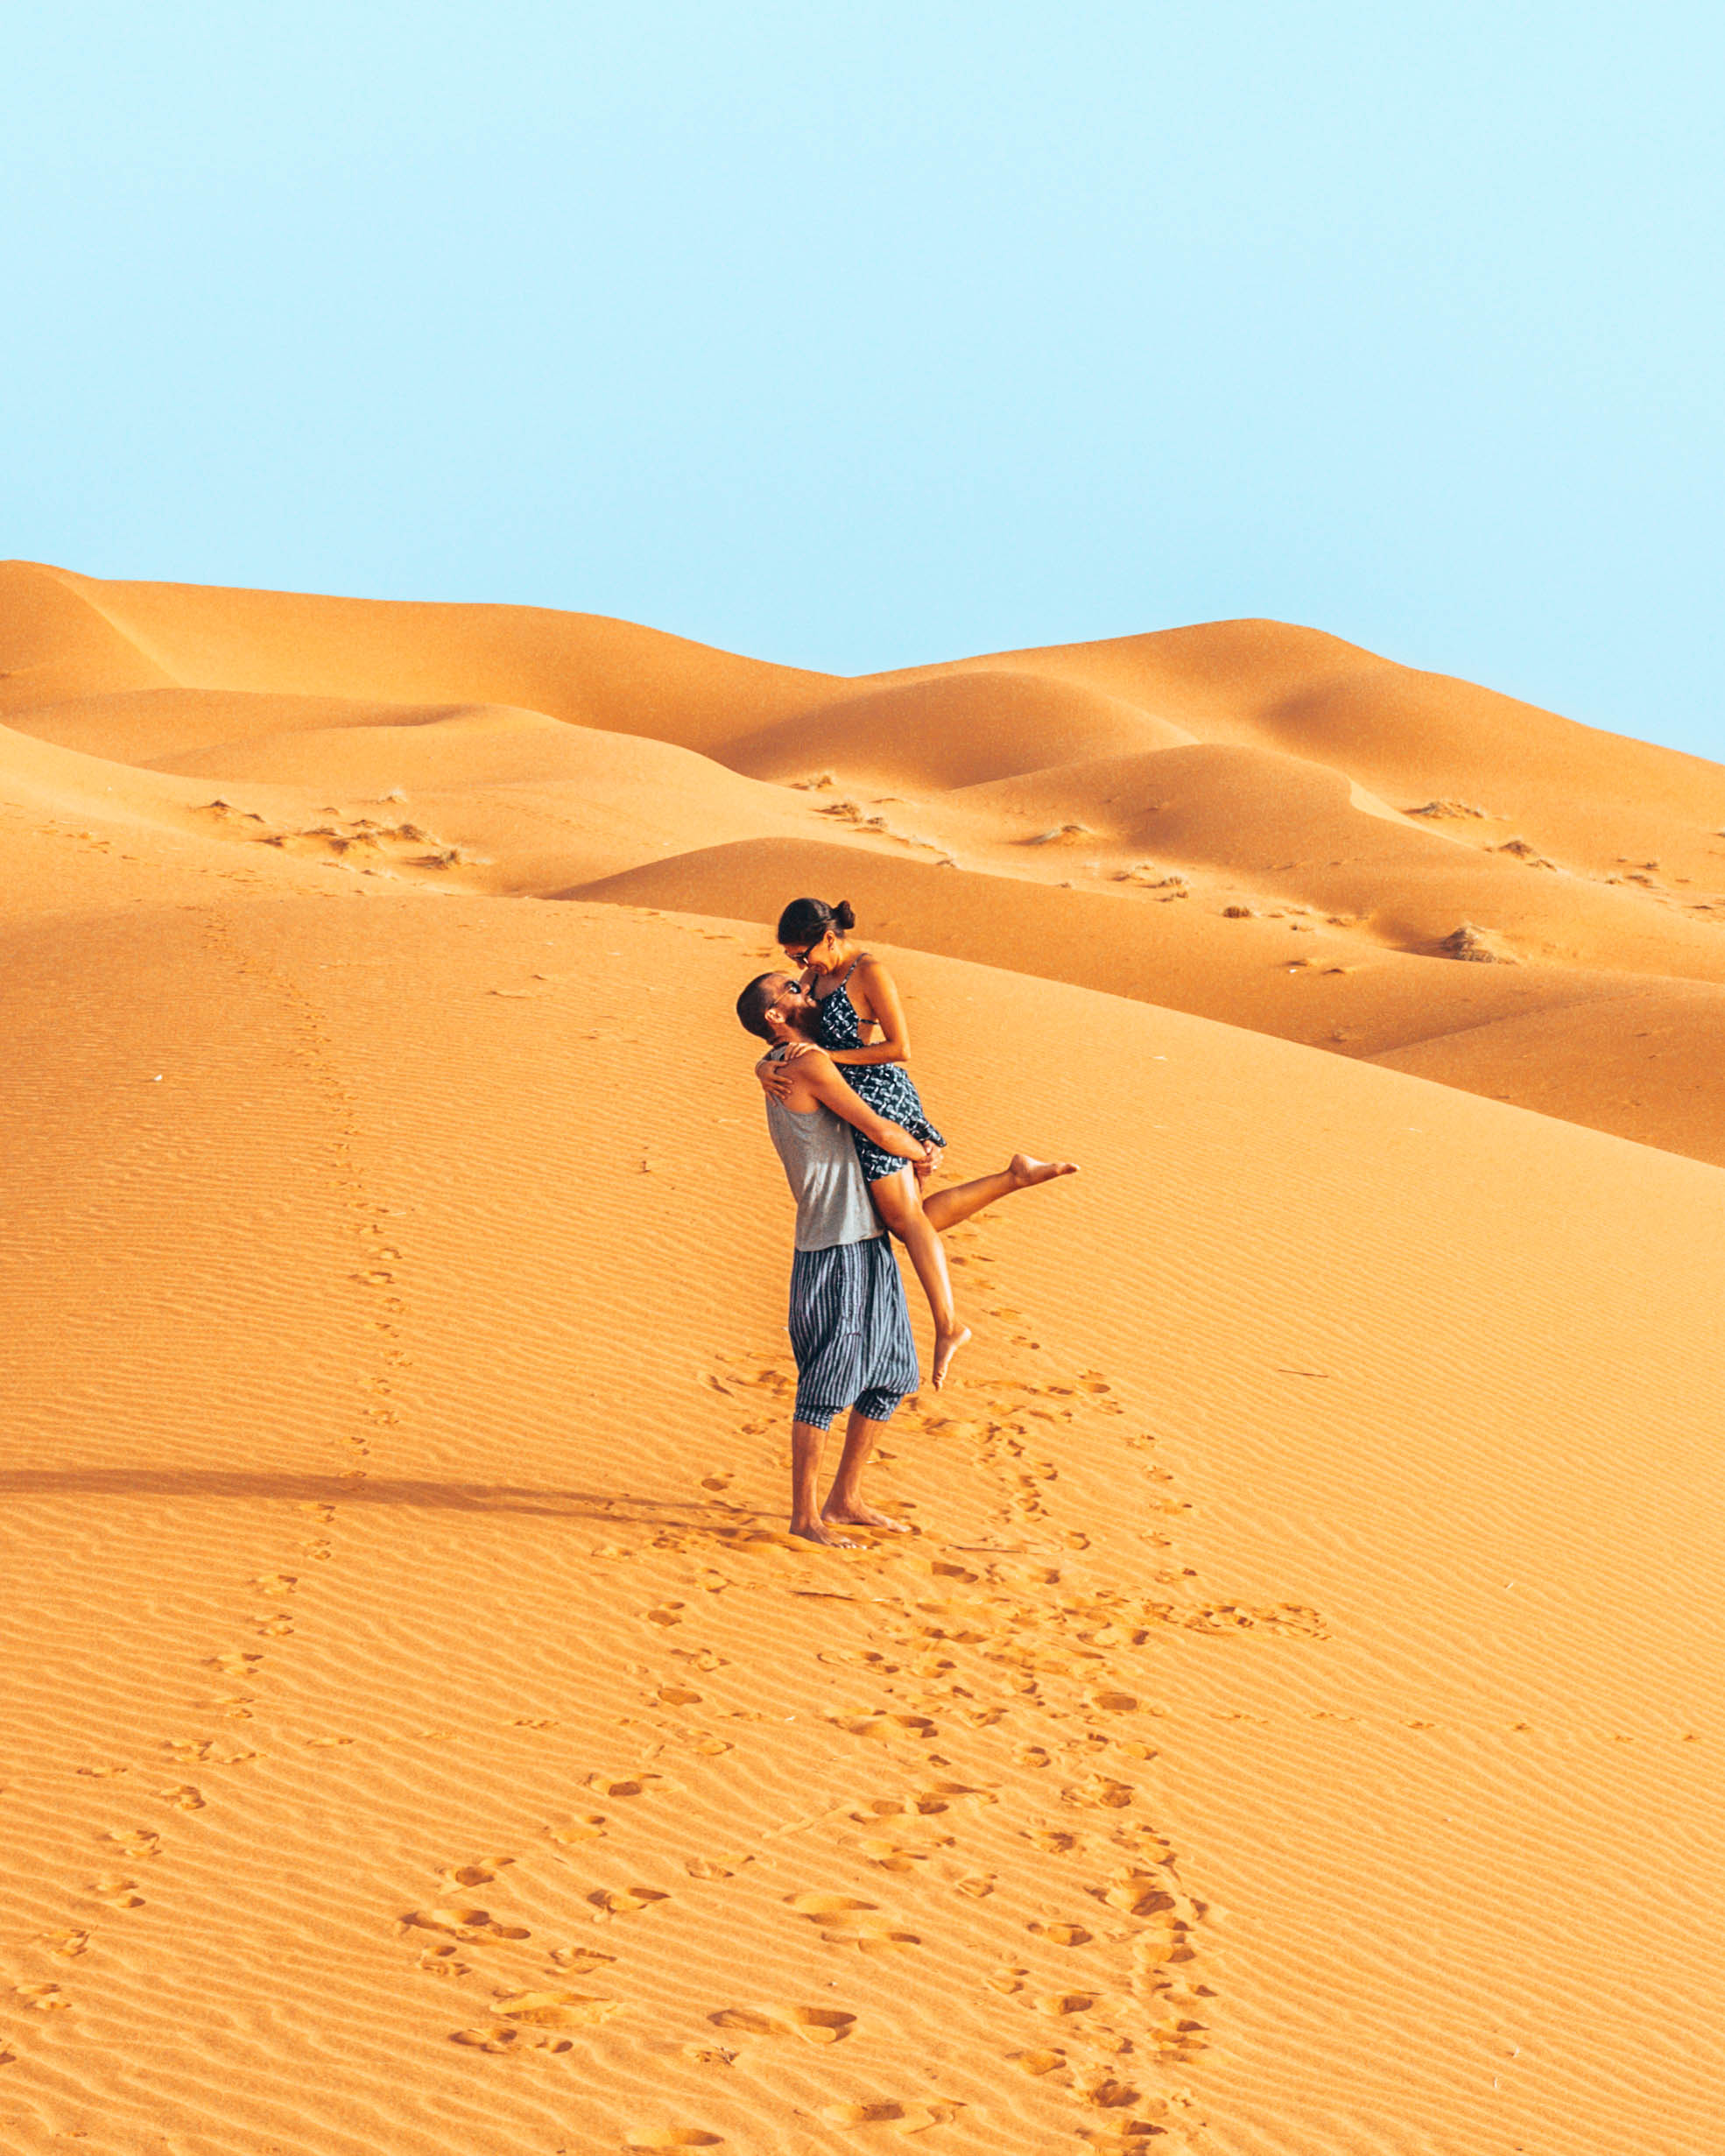 Having a blast in the Sahara desert, things to know before going to Morocco